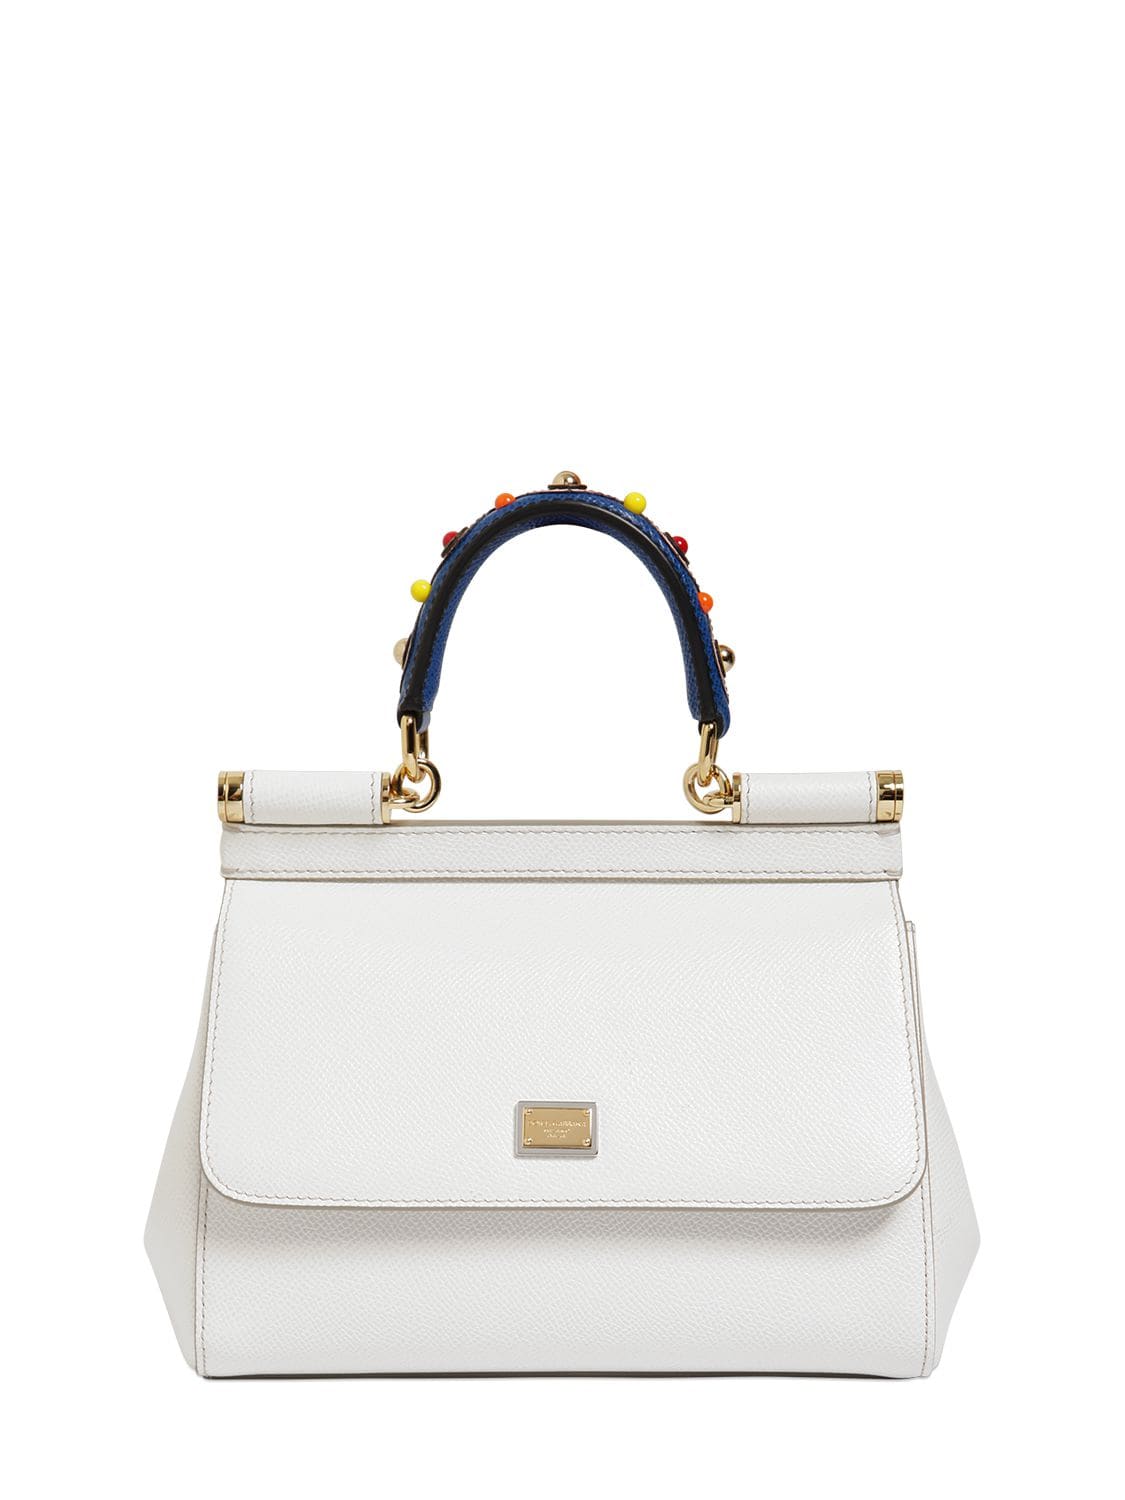 Dolce & Gabbana Small Sicily Dauphine Leather Bag In White